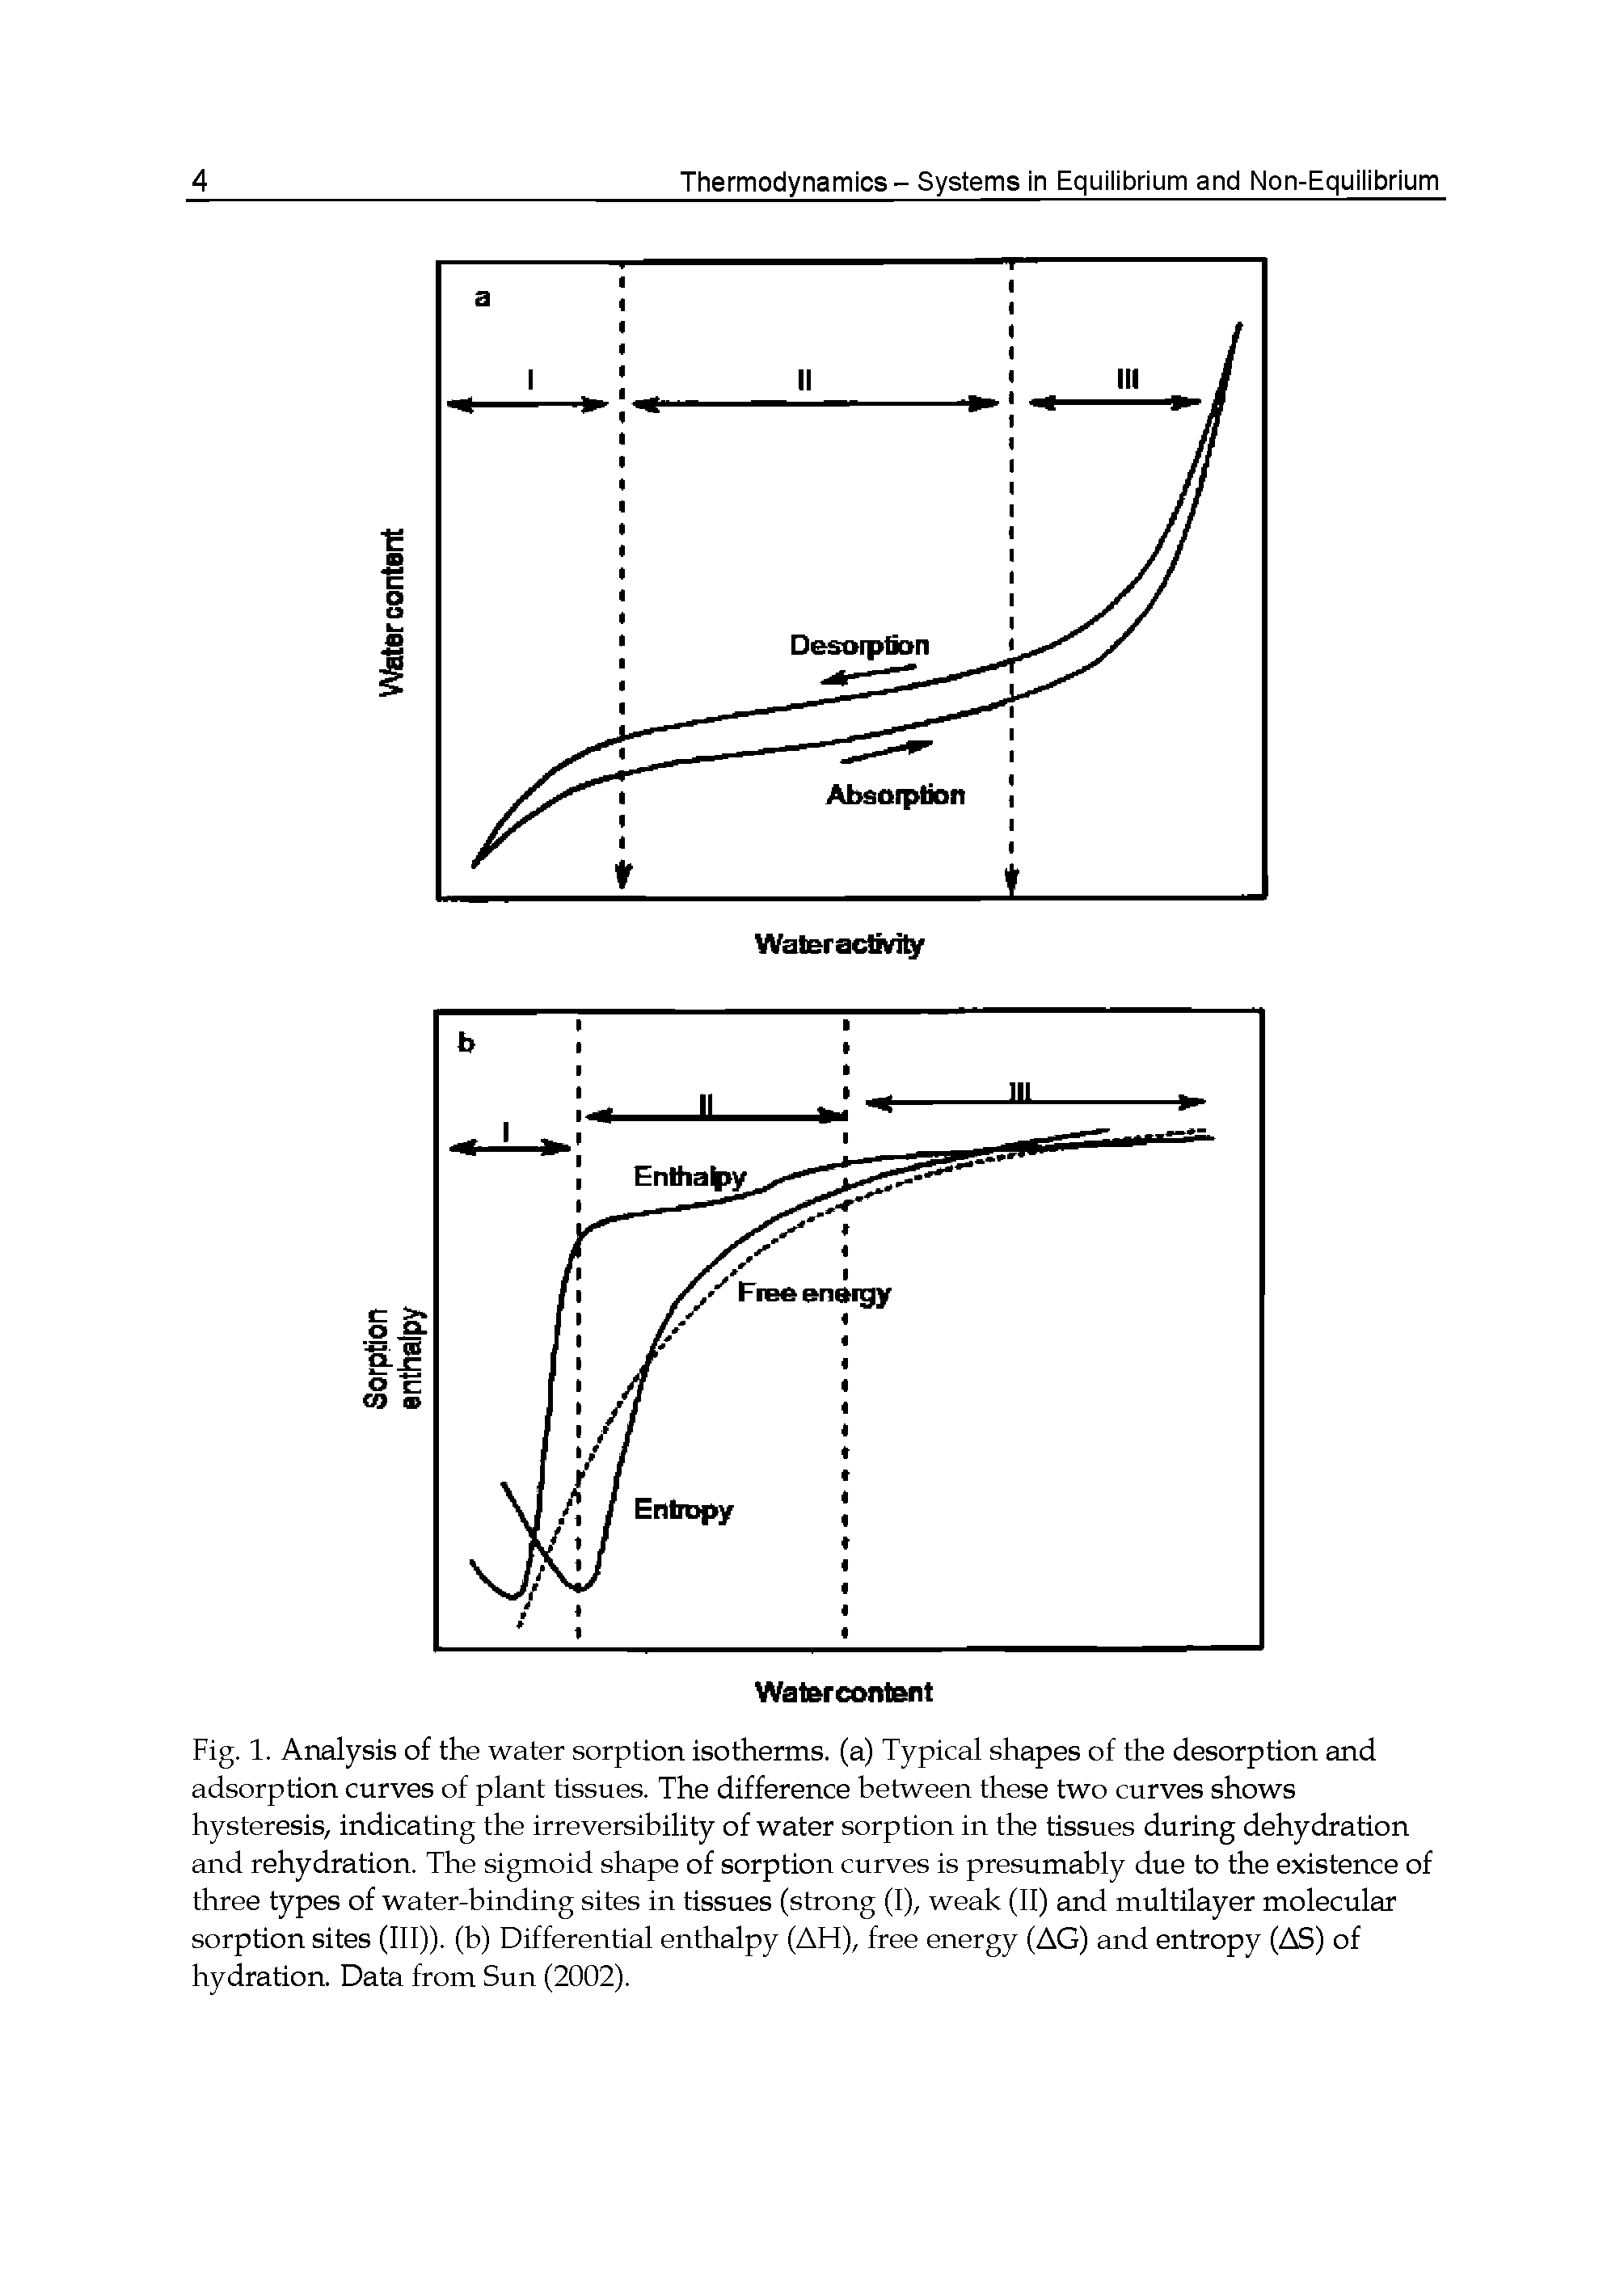 Fig. 1. Analysis of the water sorption isotherms, (a) Typical shapes of the desorption and adsorption curves of plant tissues. The difference between these two curves shows hysteresis, indicating the irreversibility of water sorption in the tissues during dehydration and rehydration. The sigmoid shape of sorption curves is presumably due to the existence of three types of water-binding sites in tissues (strong (I), weak (II) and multilayer molecular sorption sites (III)), (b) Differential enthalpy (AH), free energy (AG) and entropy (AS) of hydration. Data from Sun (2002).